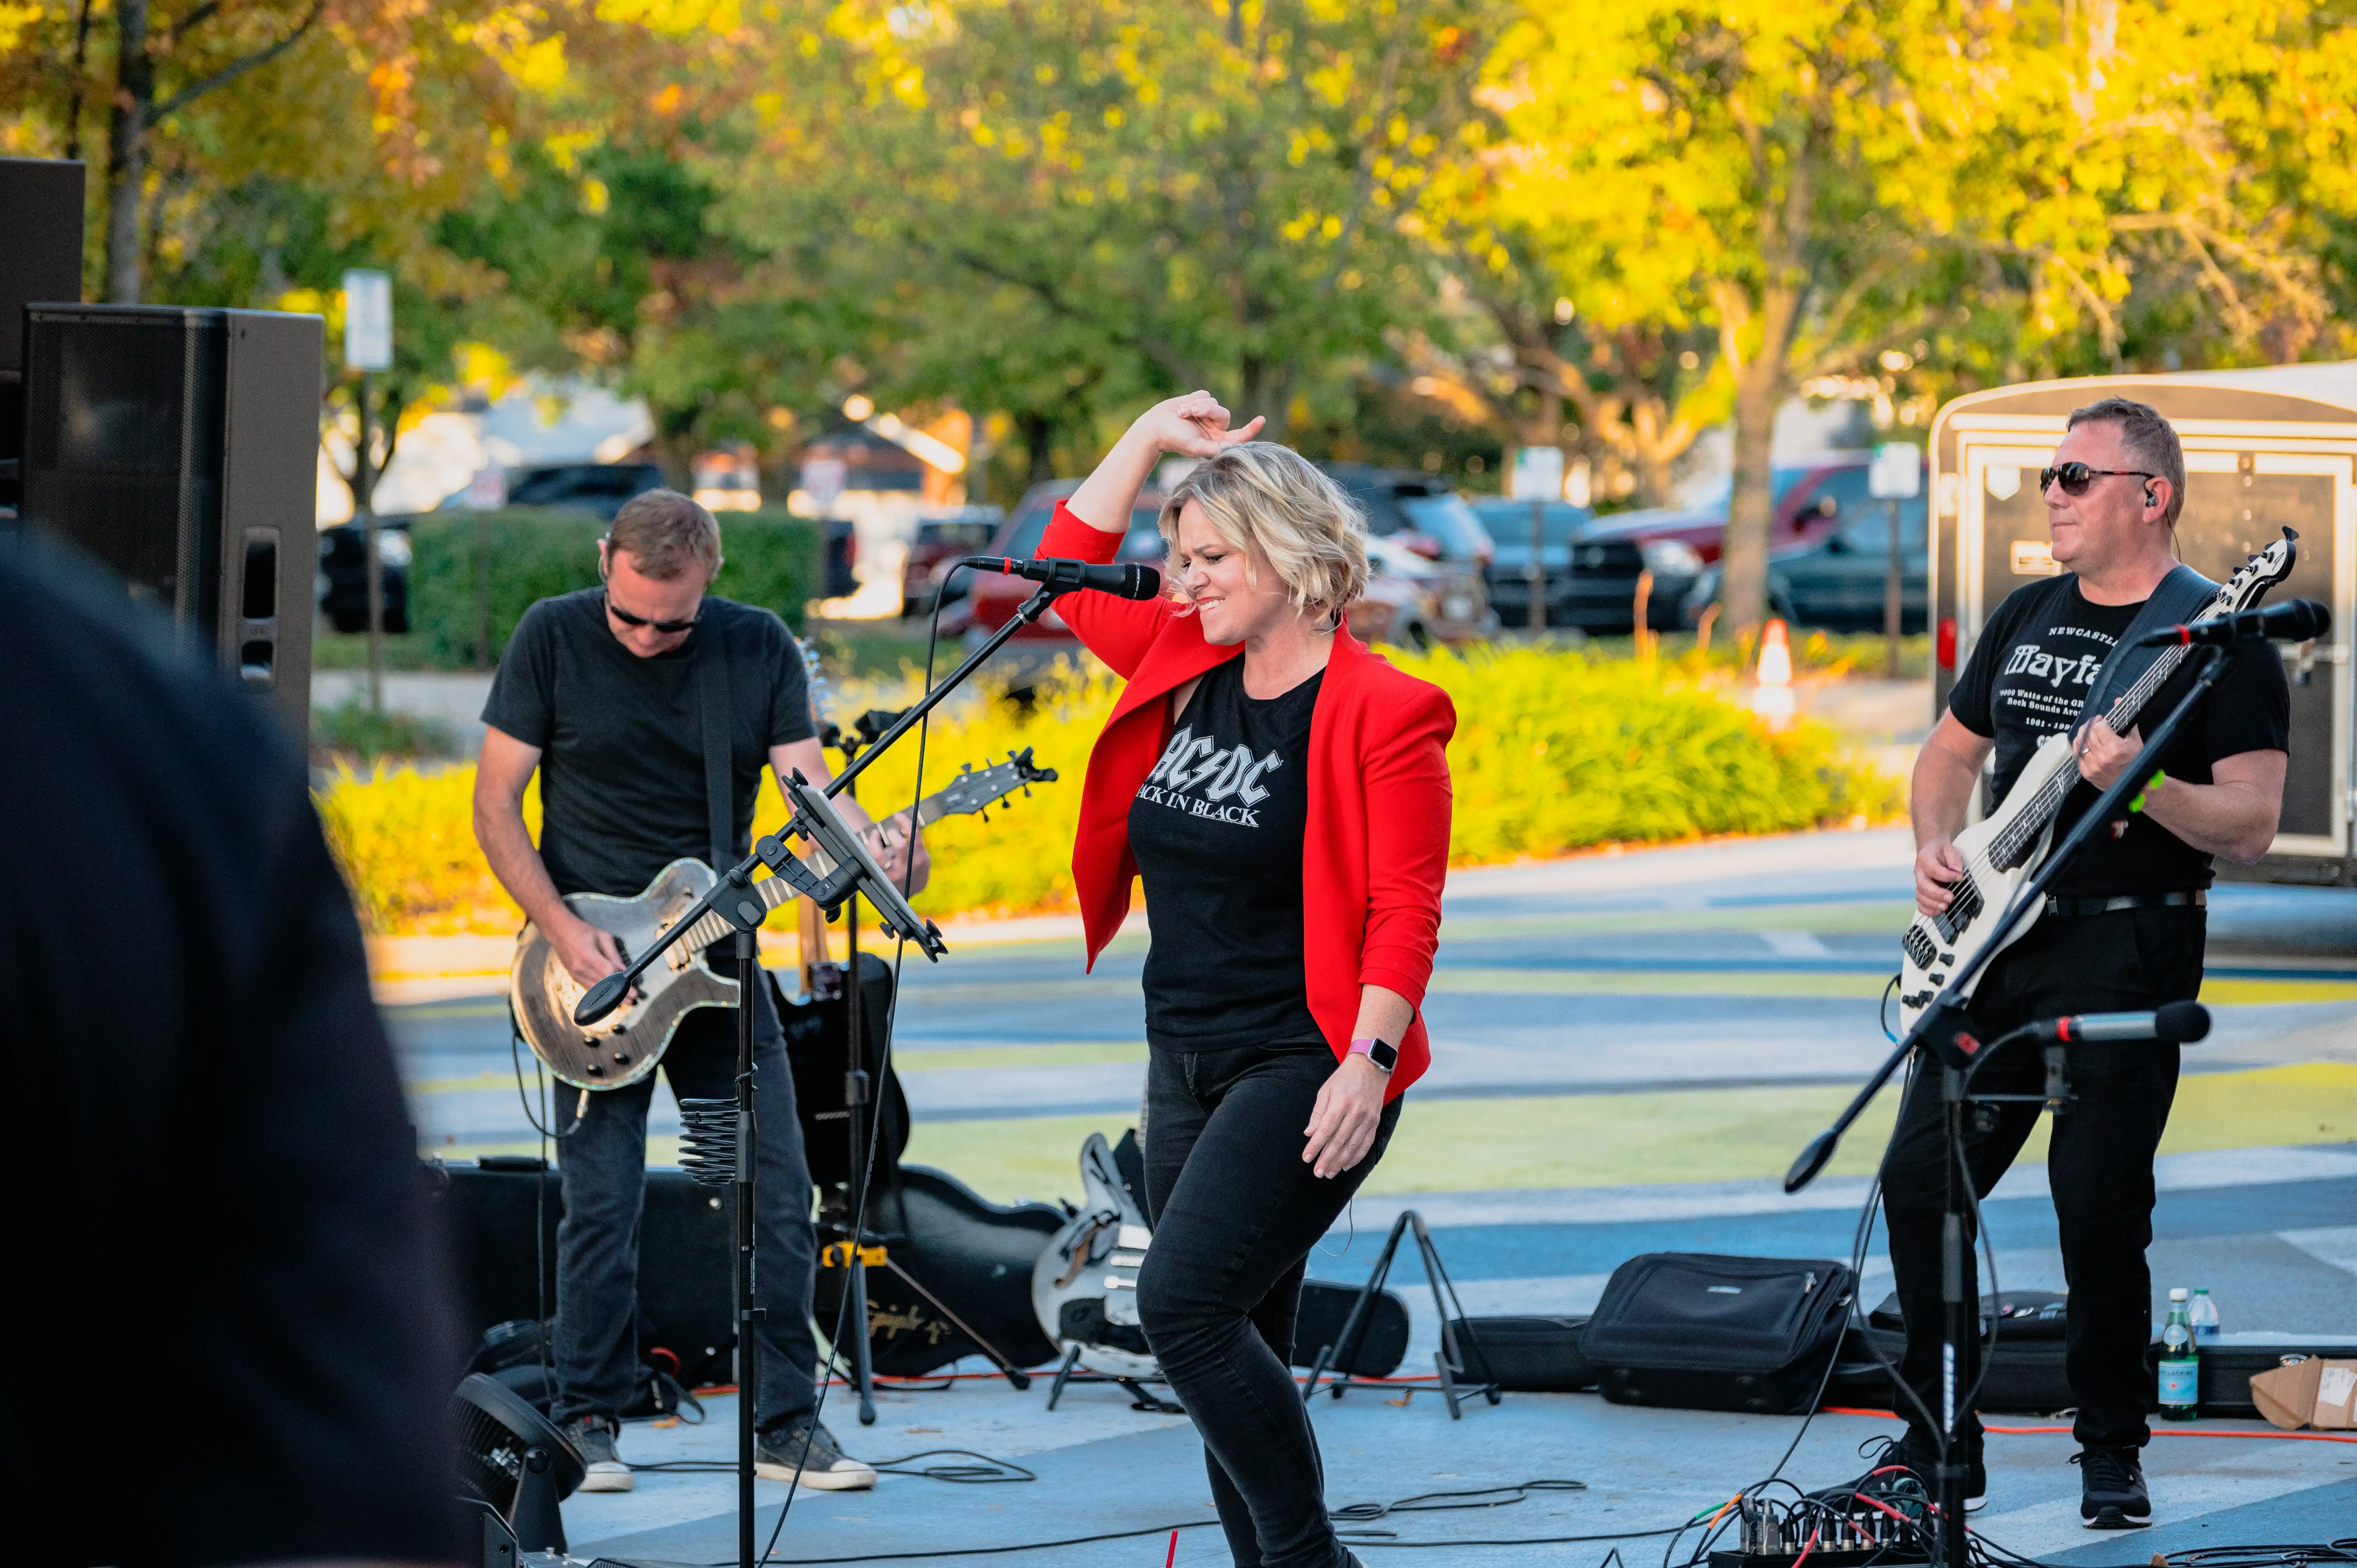 A band performing outdoors with a female singer in red jacket and two guitarists.